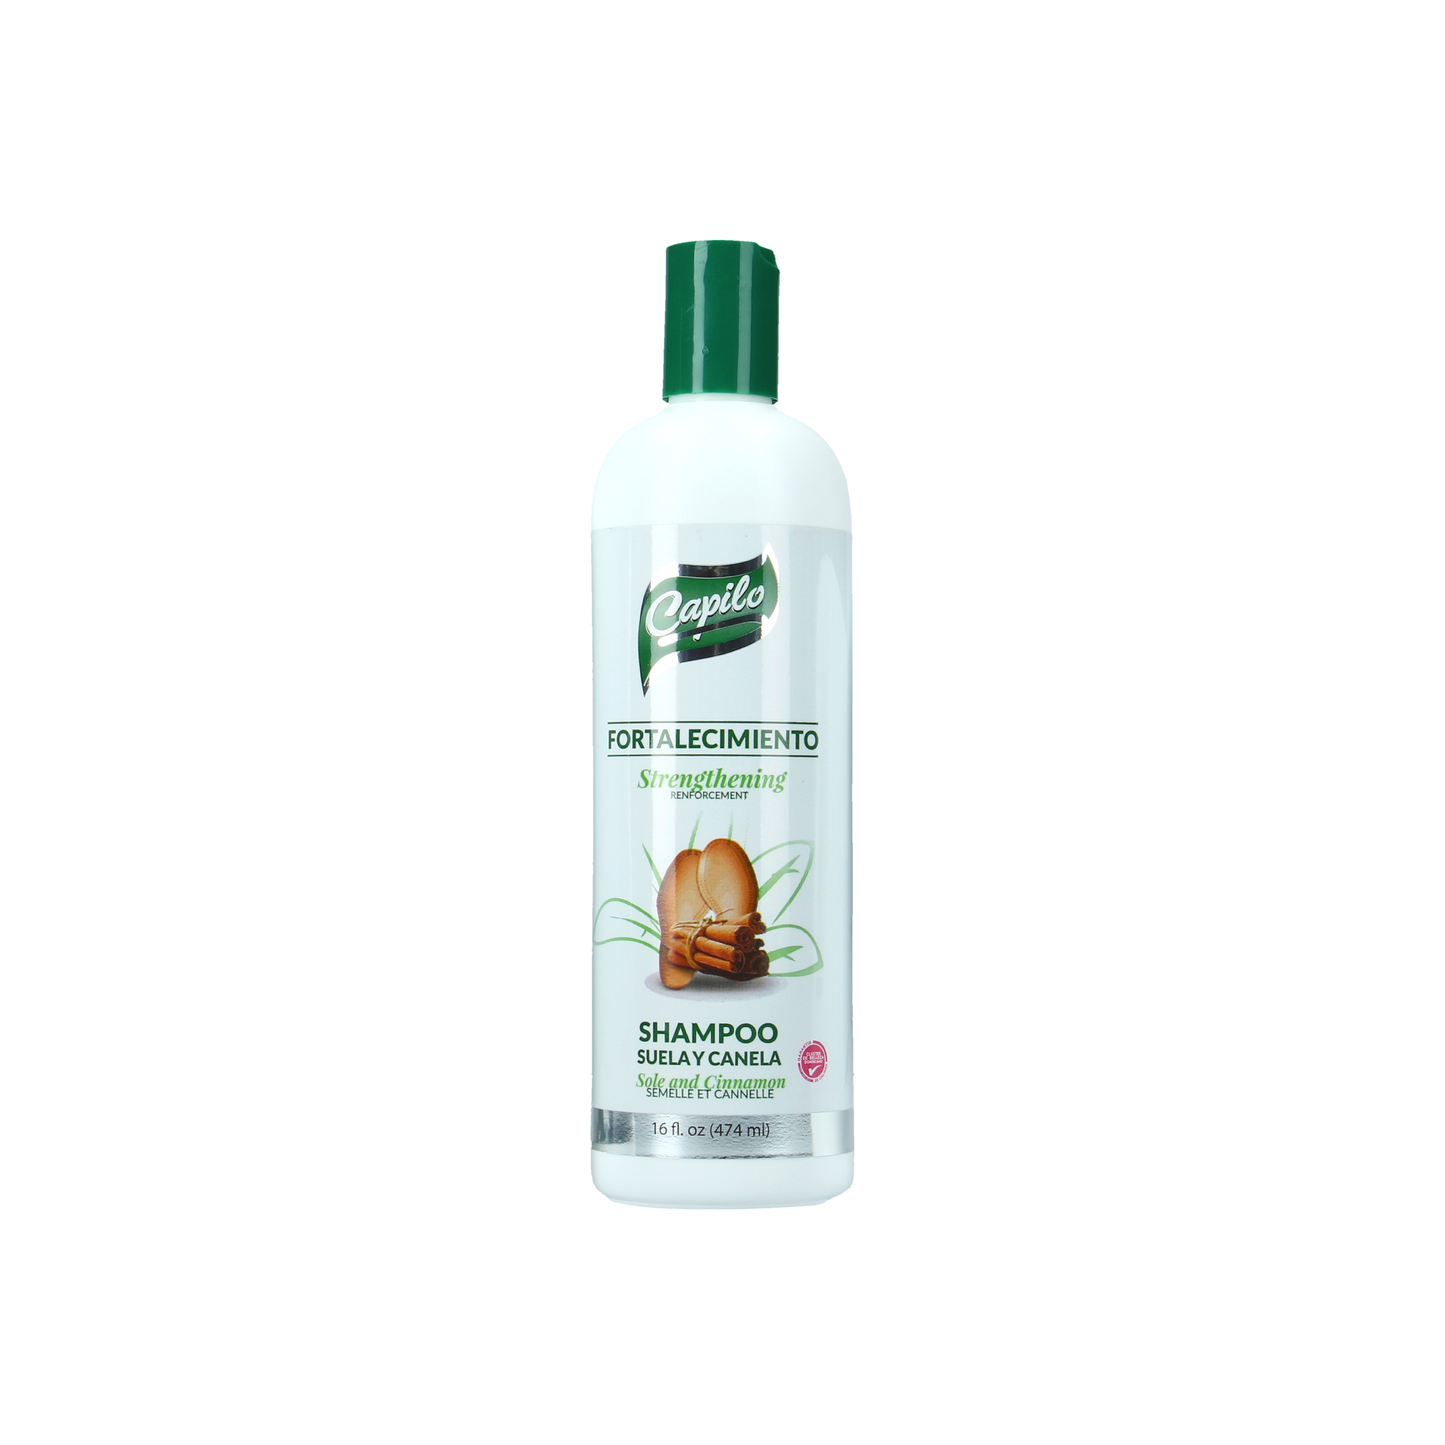 CAPILO SOLE AND CINNAMON STRENGTHENING SHAMPOO | HAIR THICKENER | MINERAL OIL FREE, PETROLEUM JELLY FREE. 16 OZ